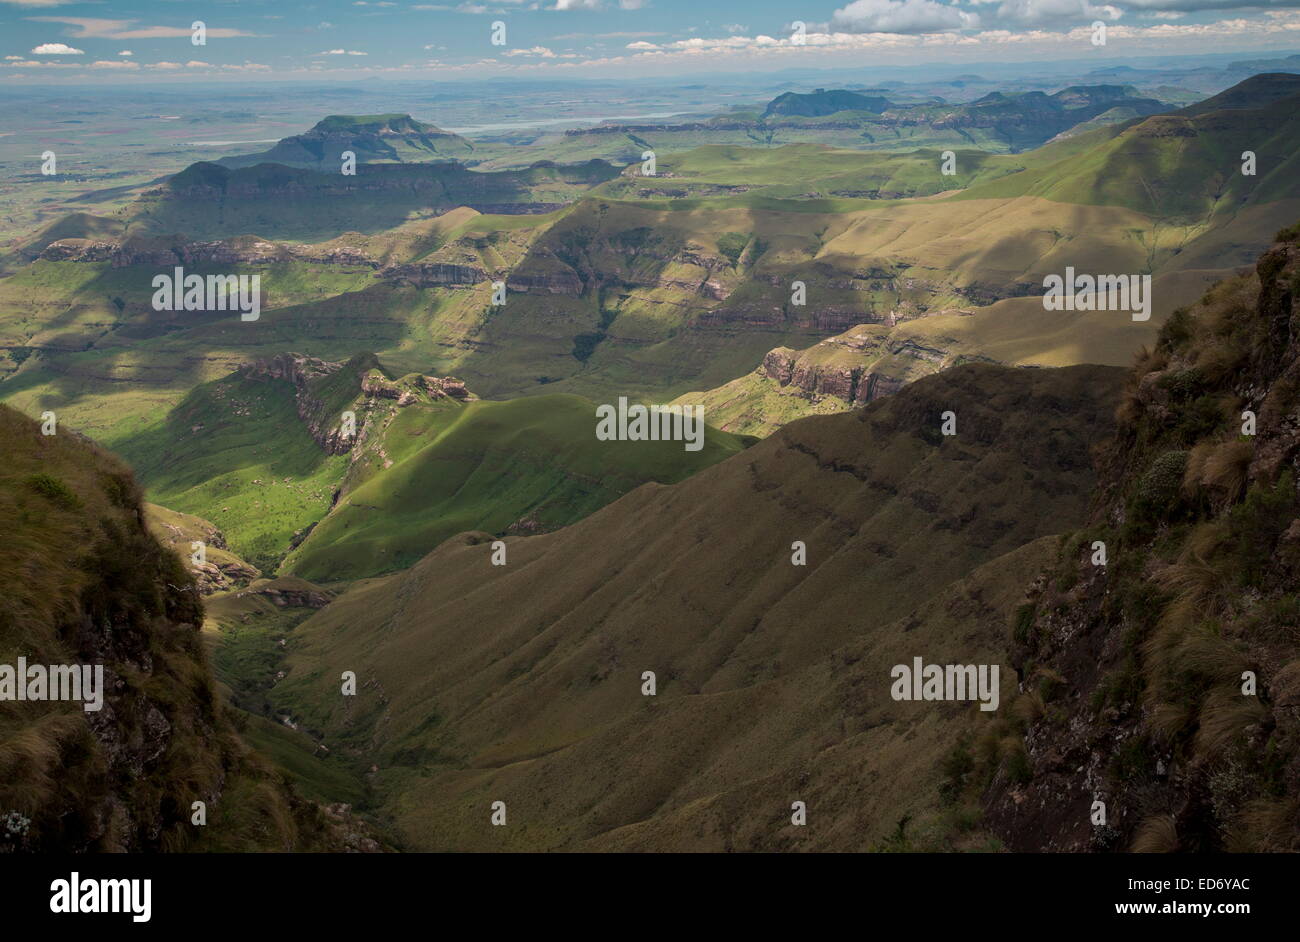 View across Royal Natal National Park from Sentinel Peak, Drakensberg Mountains, South Africa Stock Photo